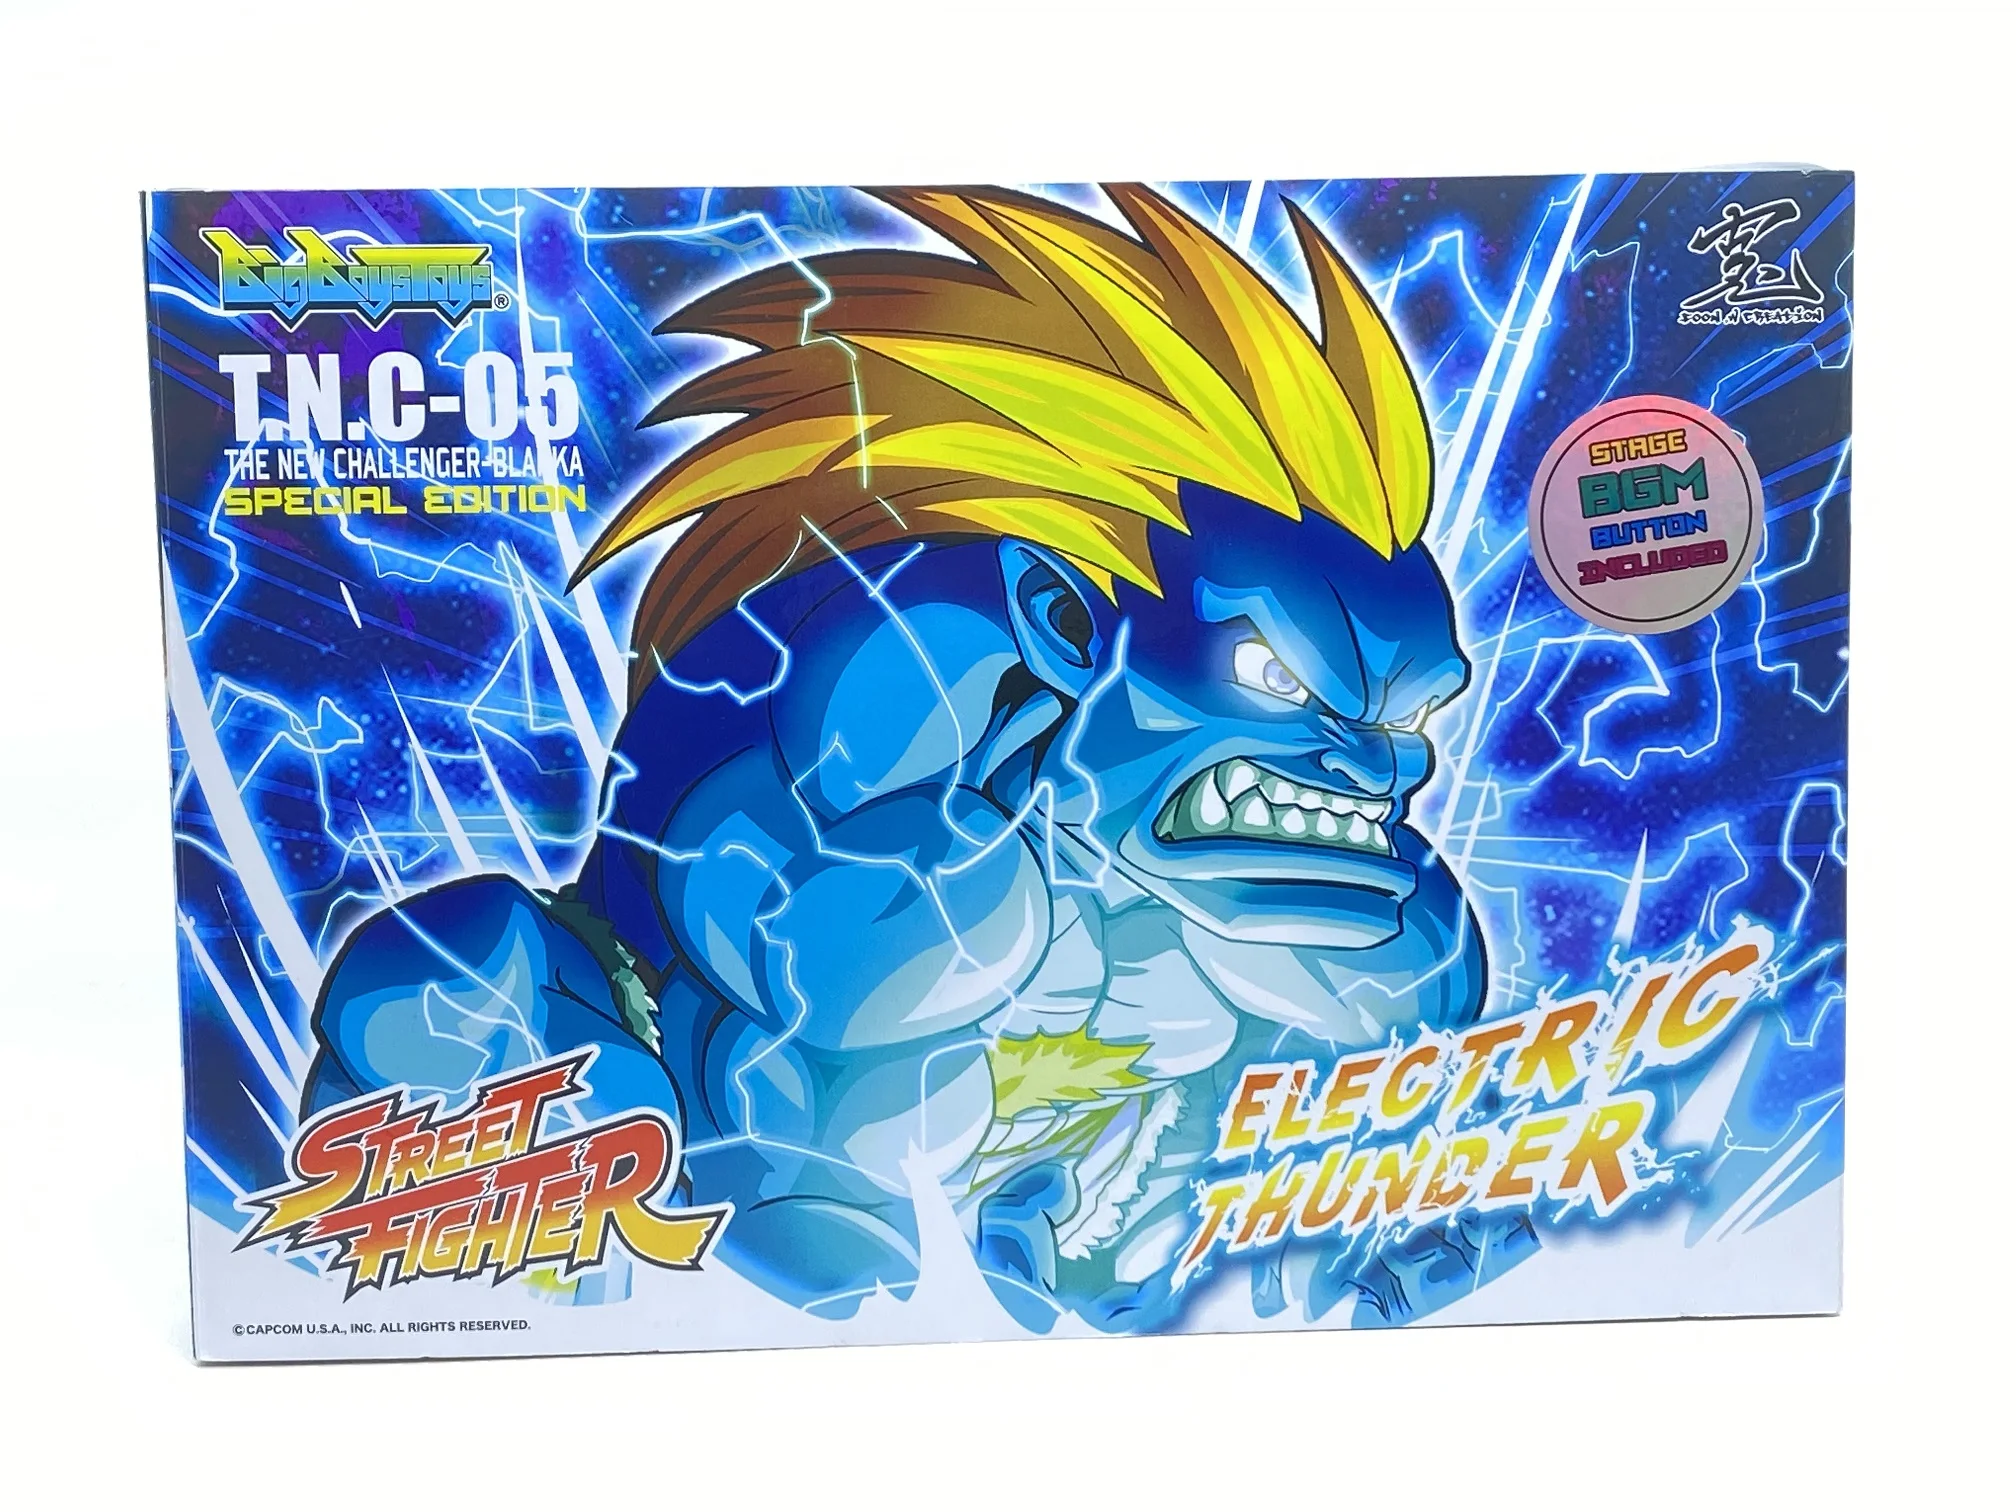 Bandai Genuine Shf Street Fighter Anime Figure Blanka Joints Movable Action  Figure Toys For Children Boys Kids Gifts Ornaments - Action Figures -  AliExpress